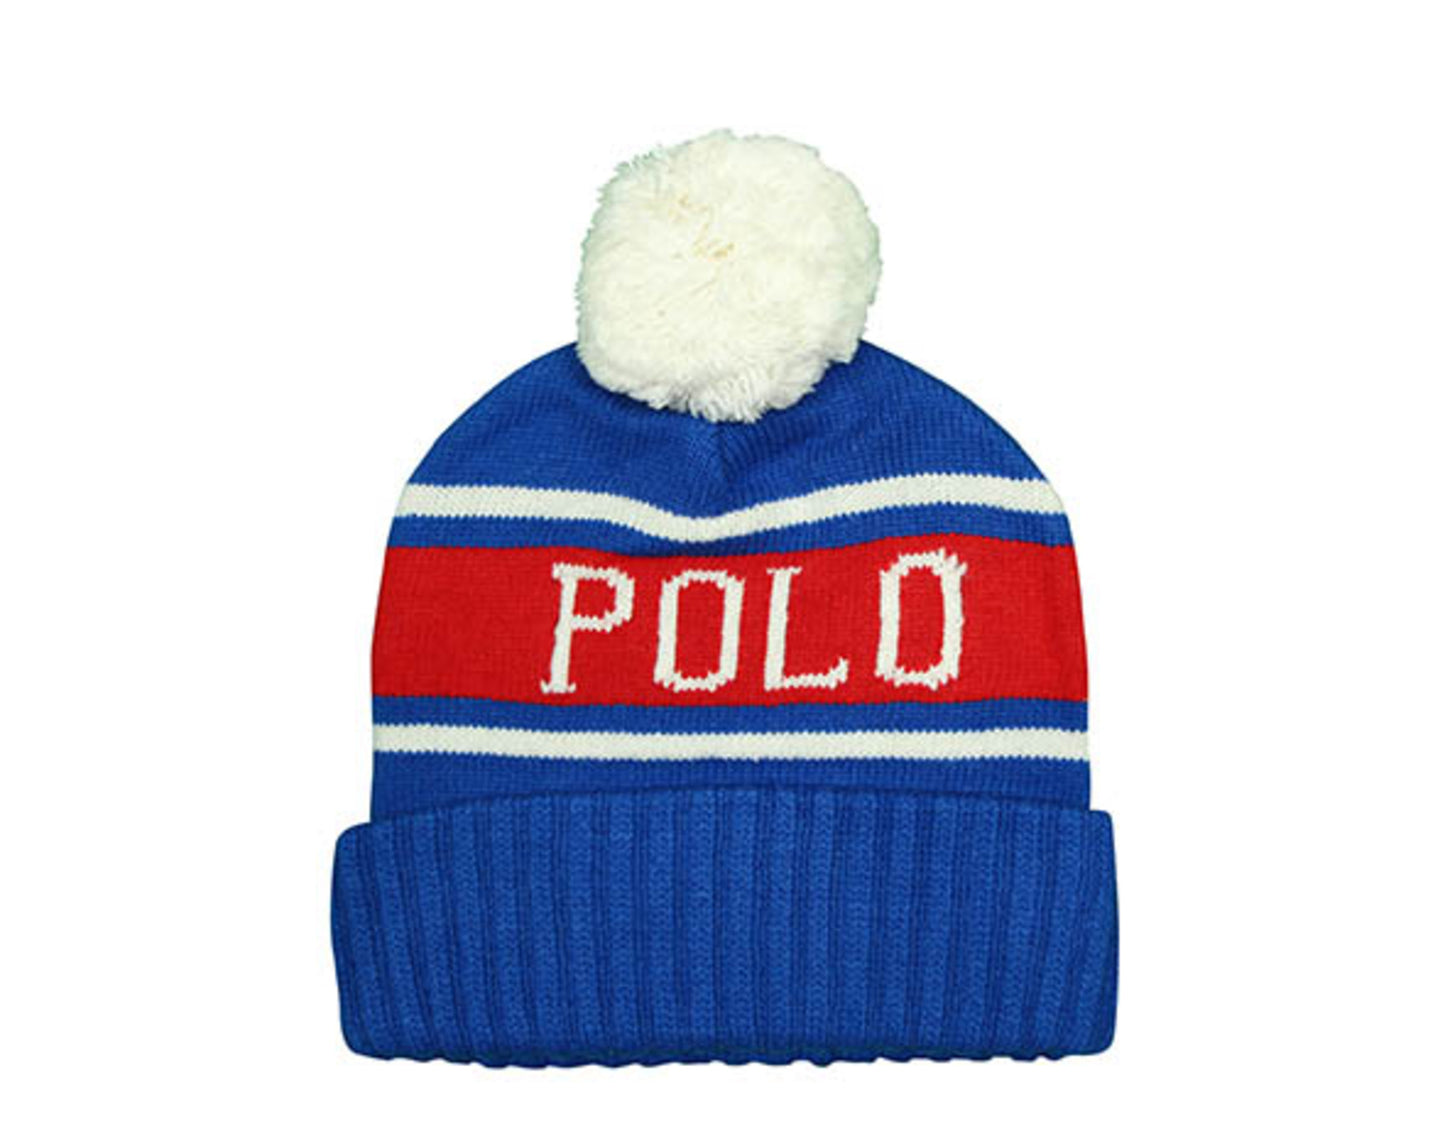 Polo Ralph Lauren Colorblocked USA Blue/Red Pom-Pom Knit Hat PC0248-432